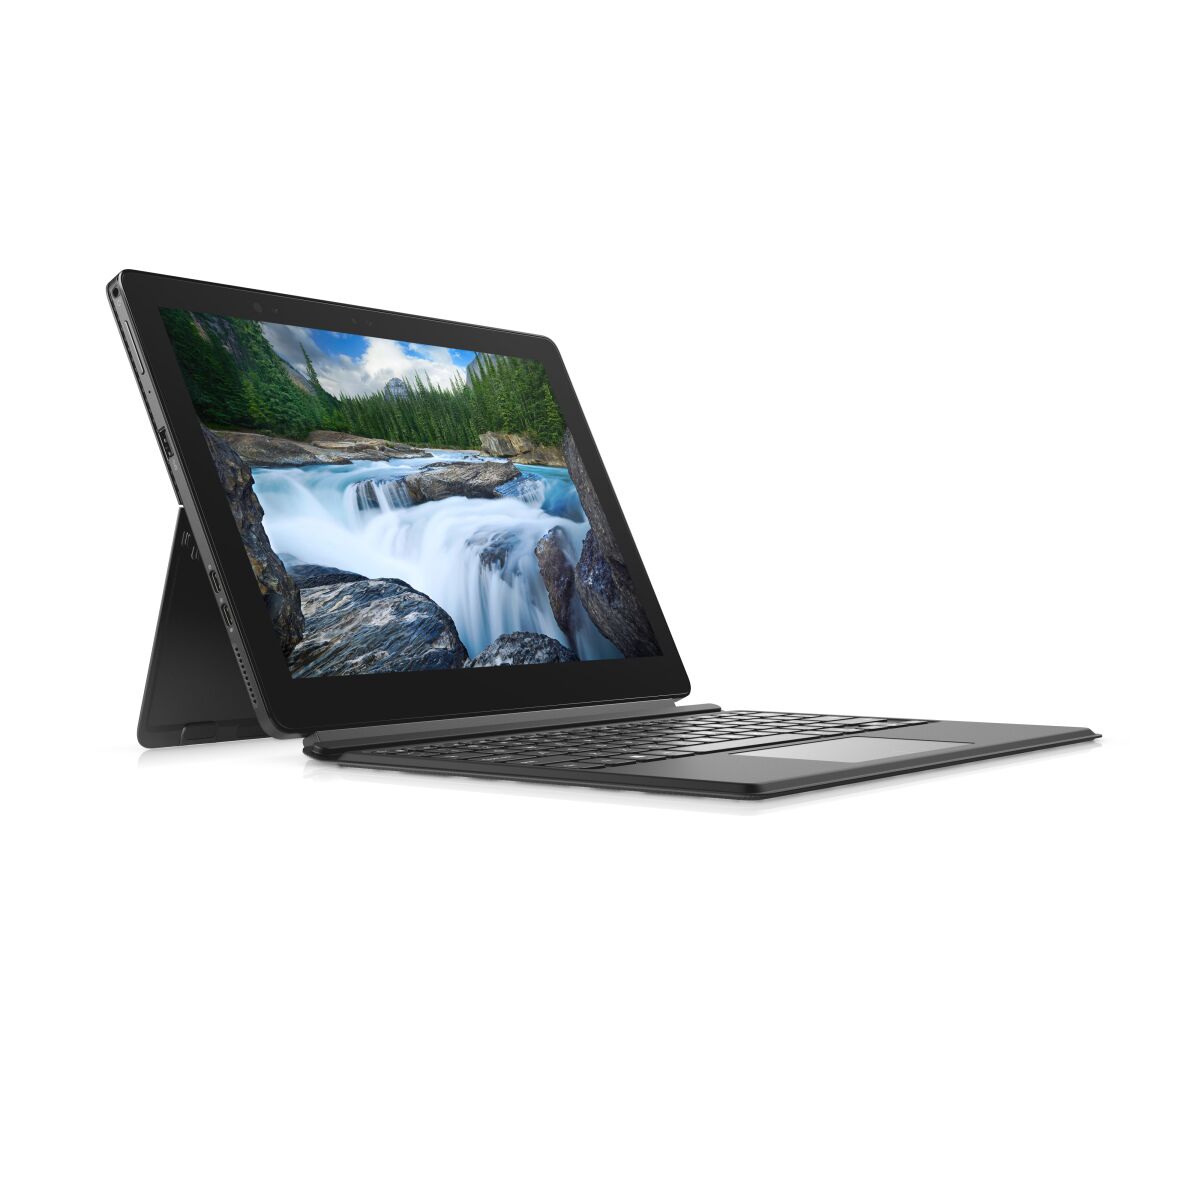 DELL Latitude 5290 - 5290_2IN1-3423 laptop specifications